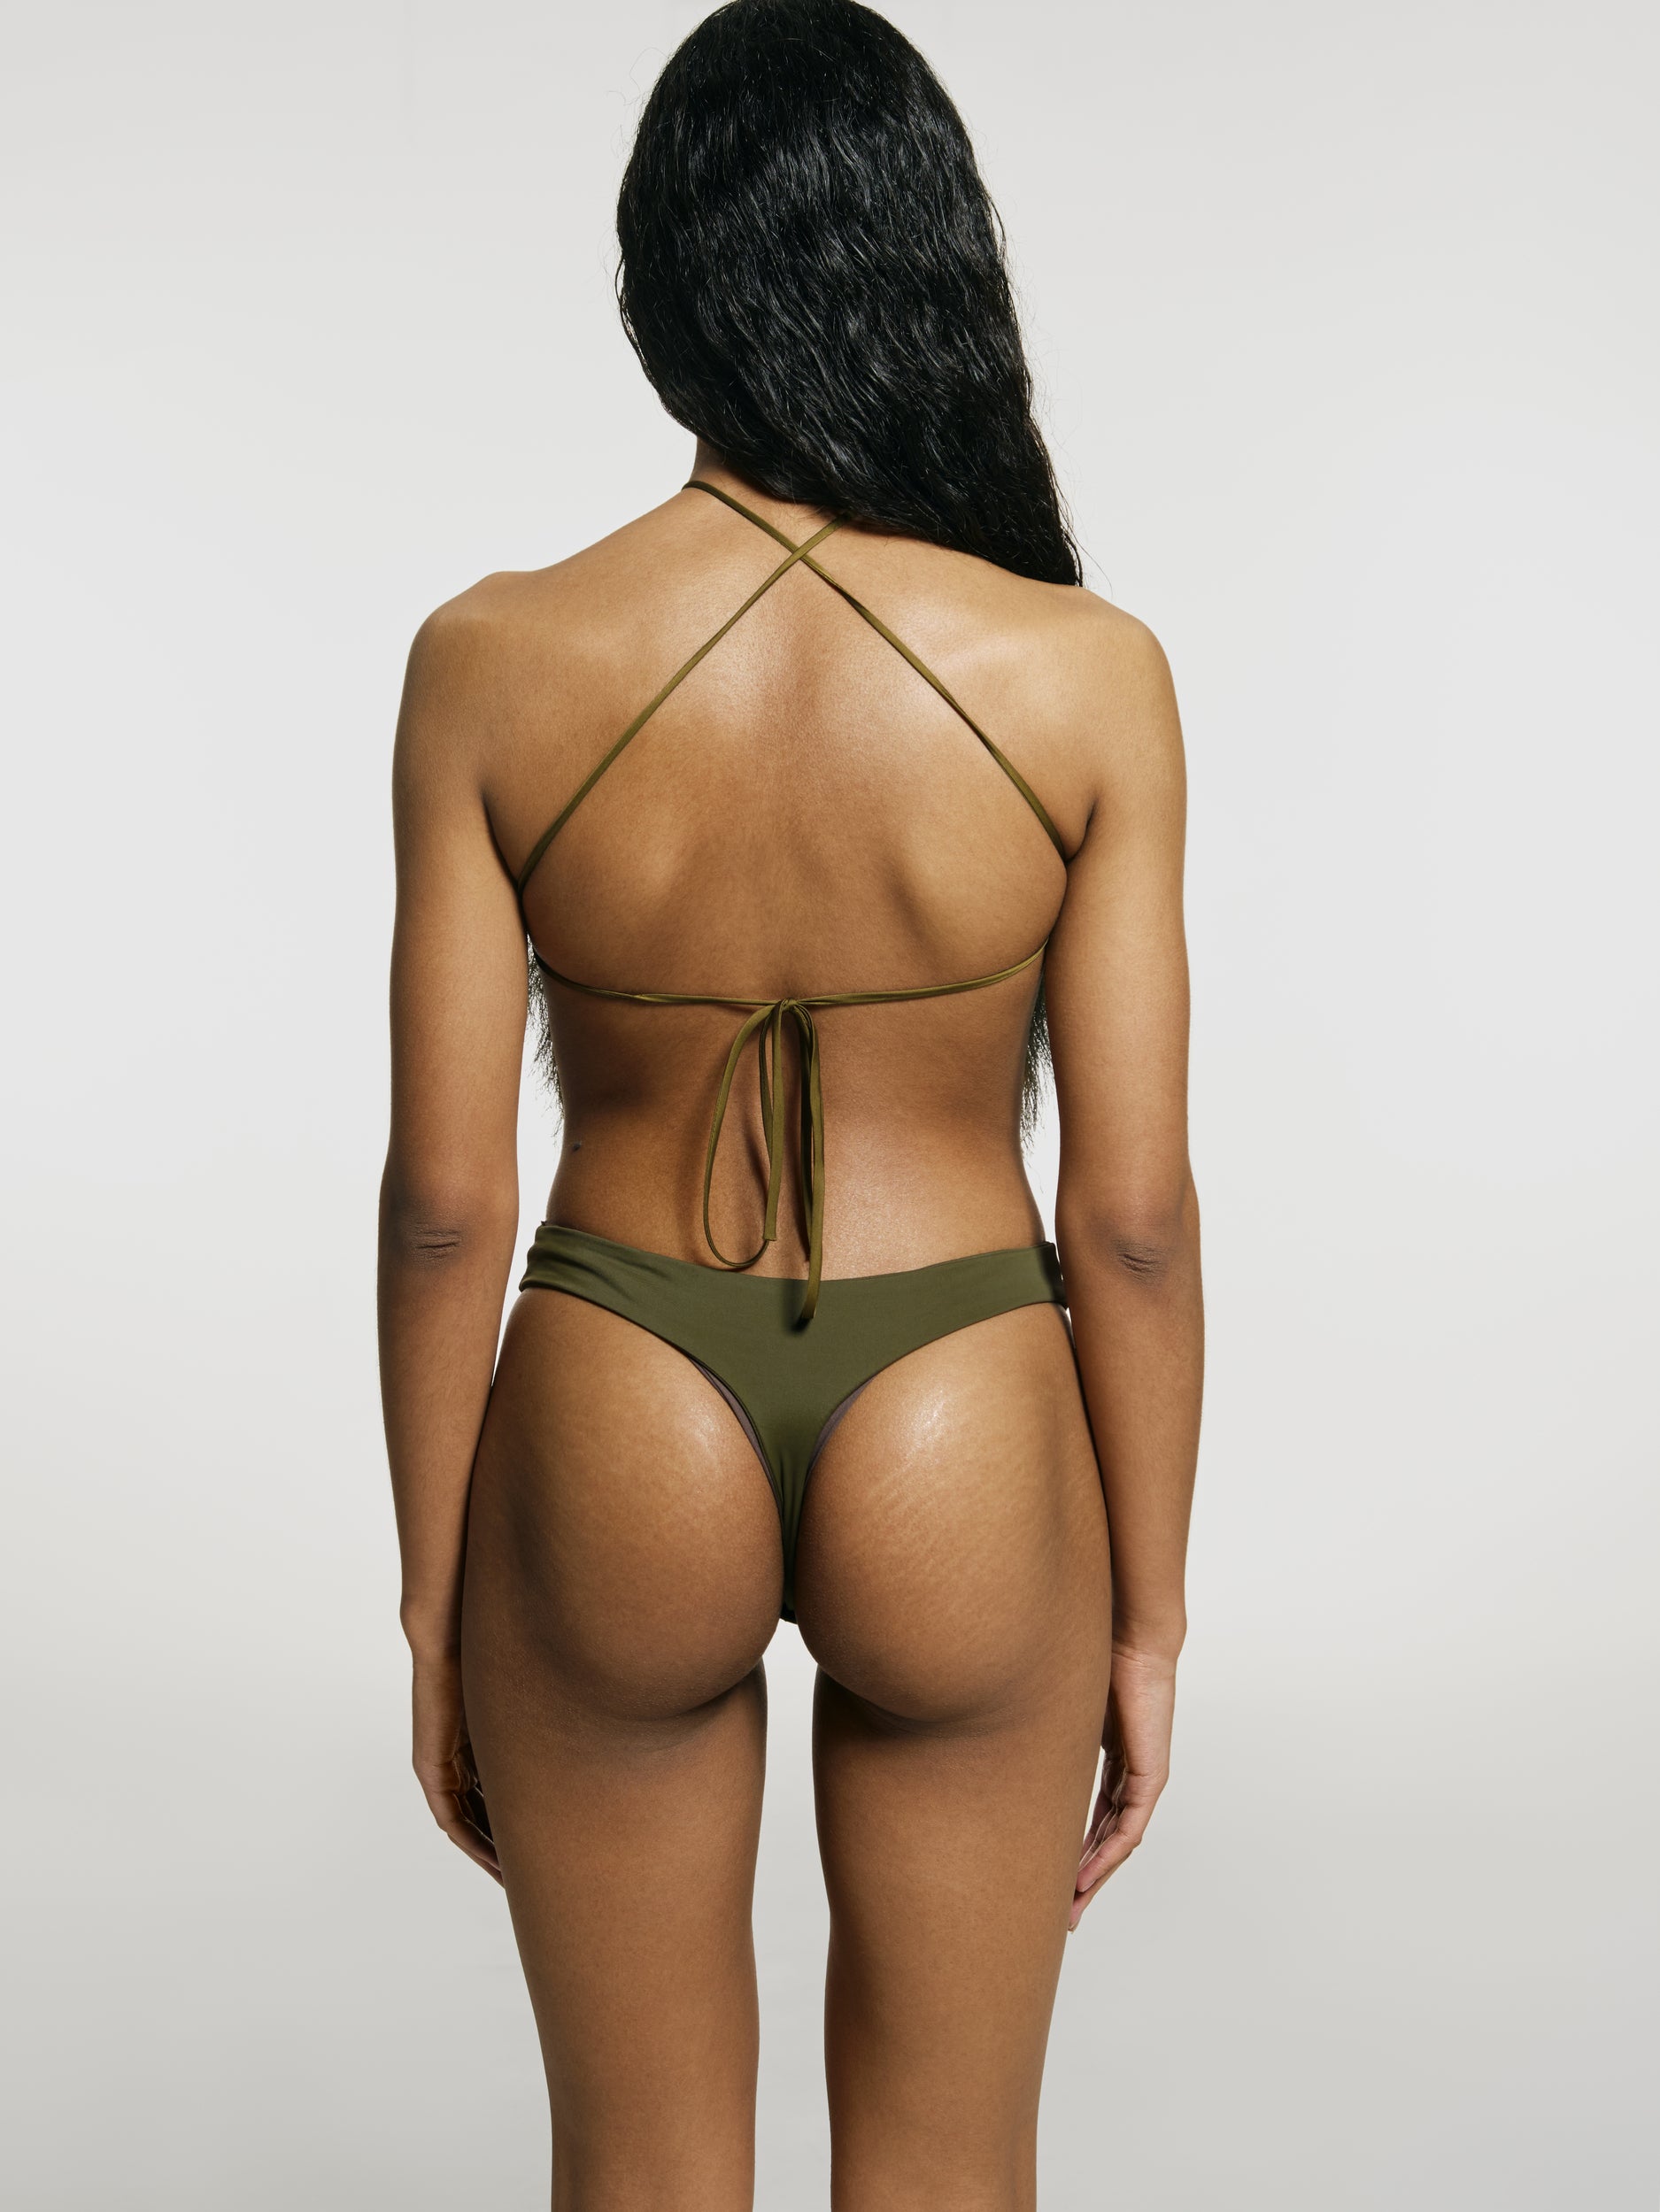 Medium full shot of a girl facing back in a green opened back sleeveless bodysuit with a vertical cut in front